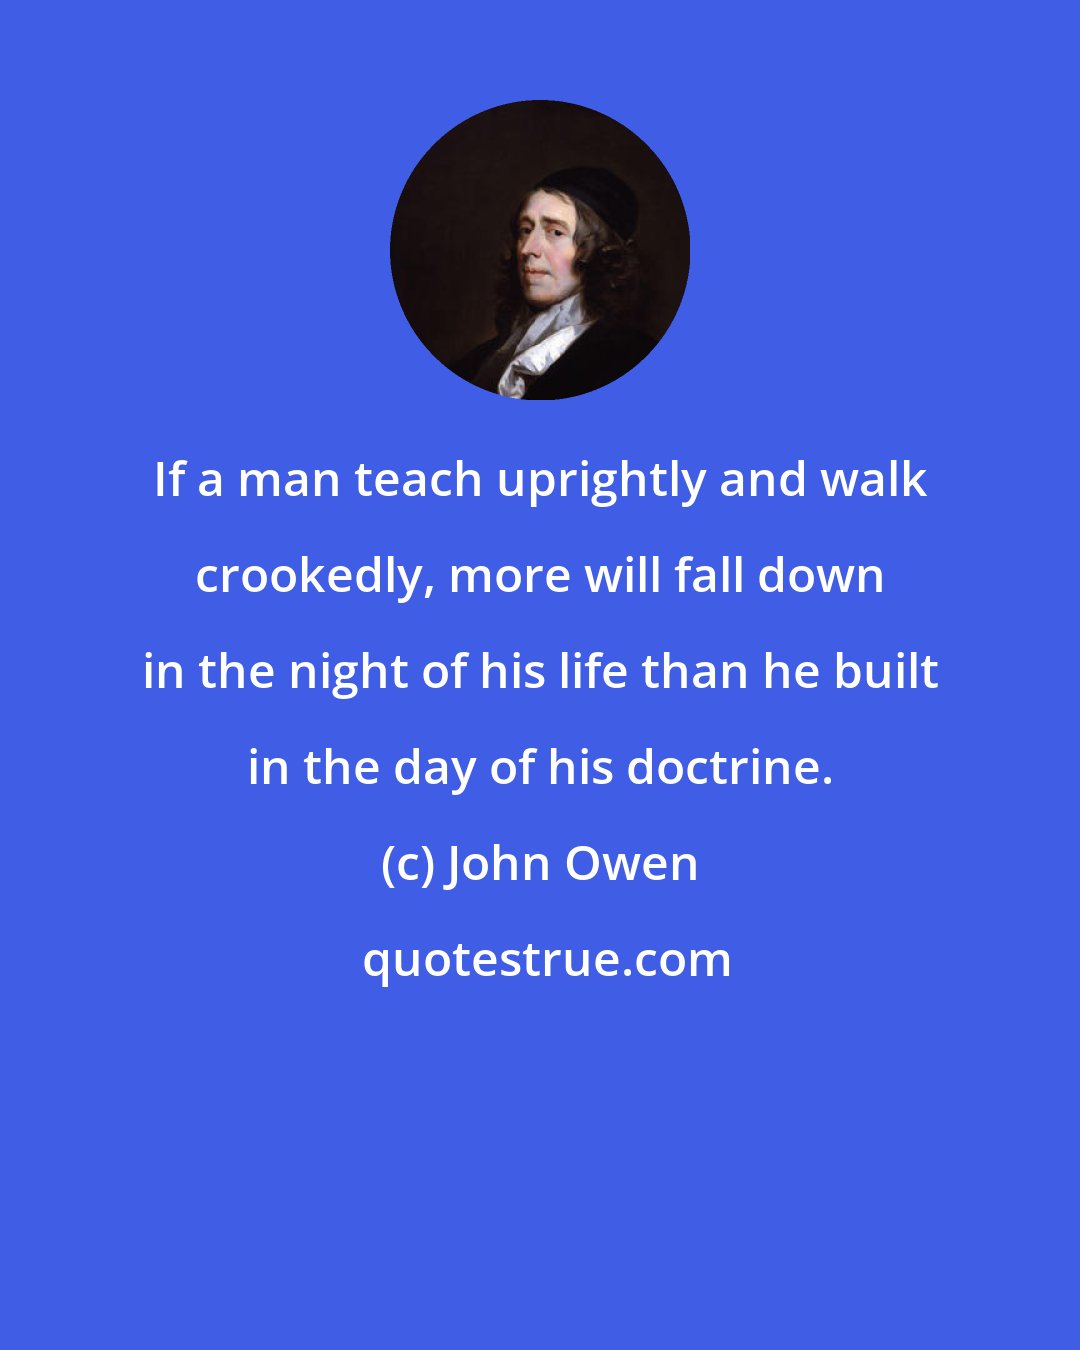 John Owen: If a man teach uprightly and walk crookedly, more will fall down in the night of his life than he built in the day of his doctrine.